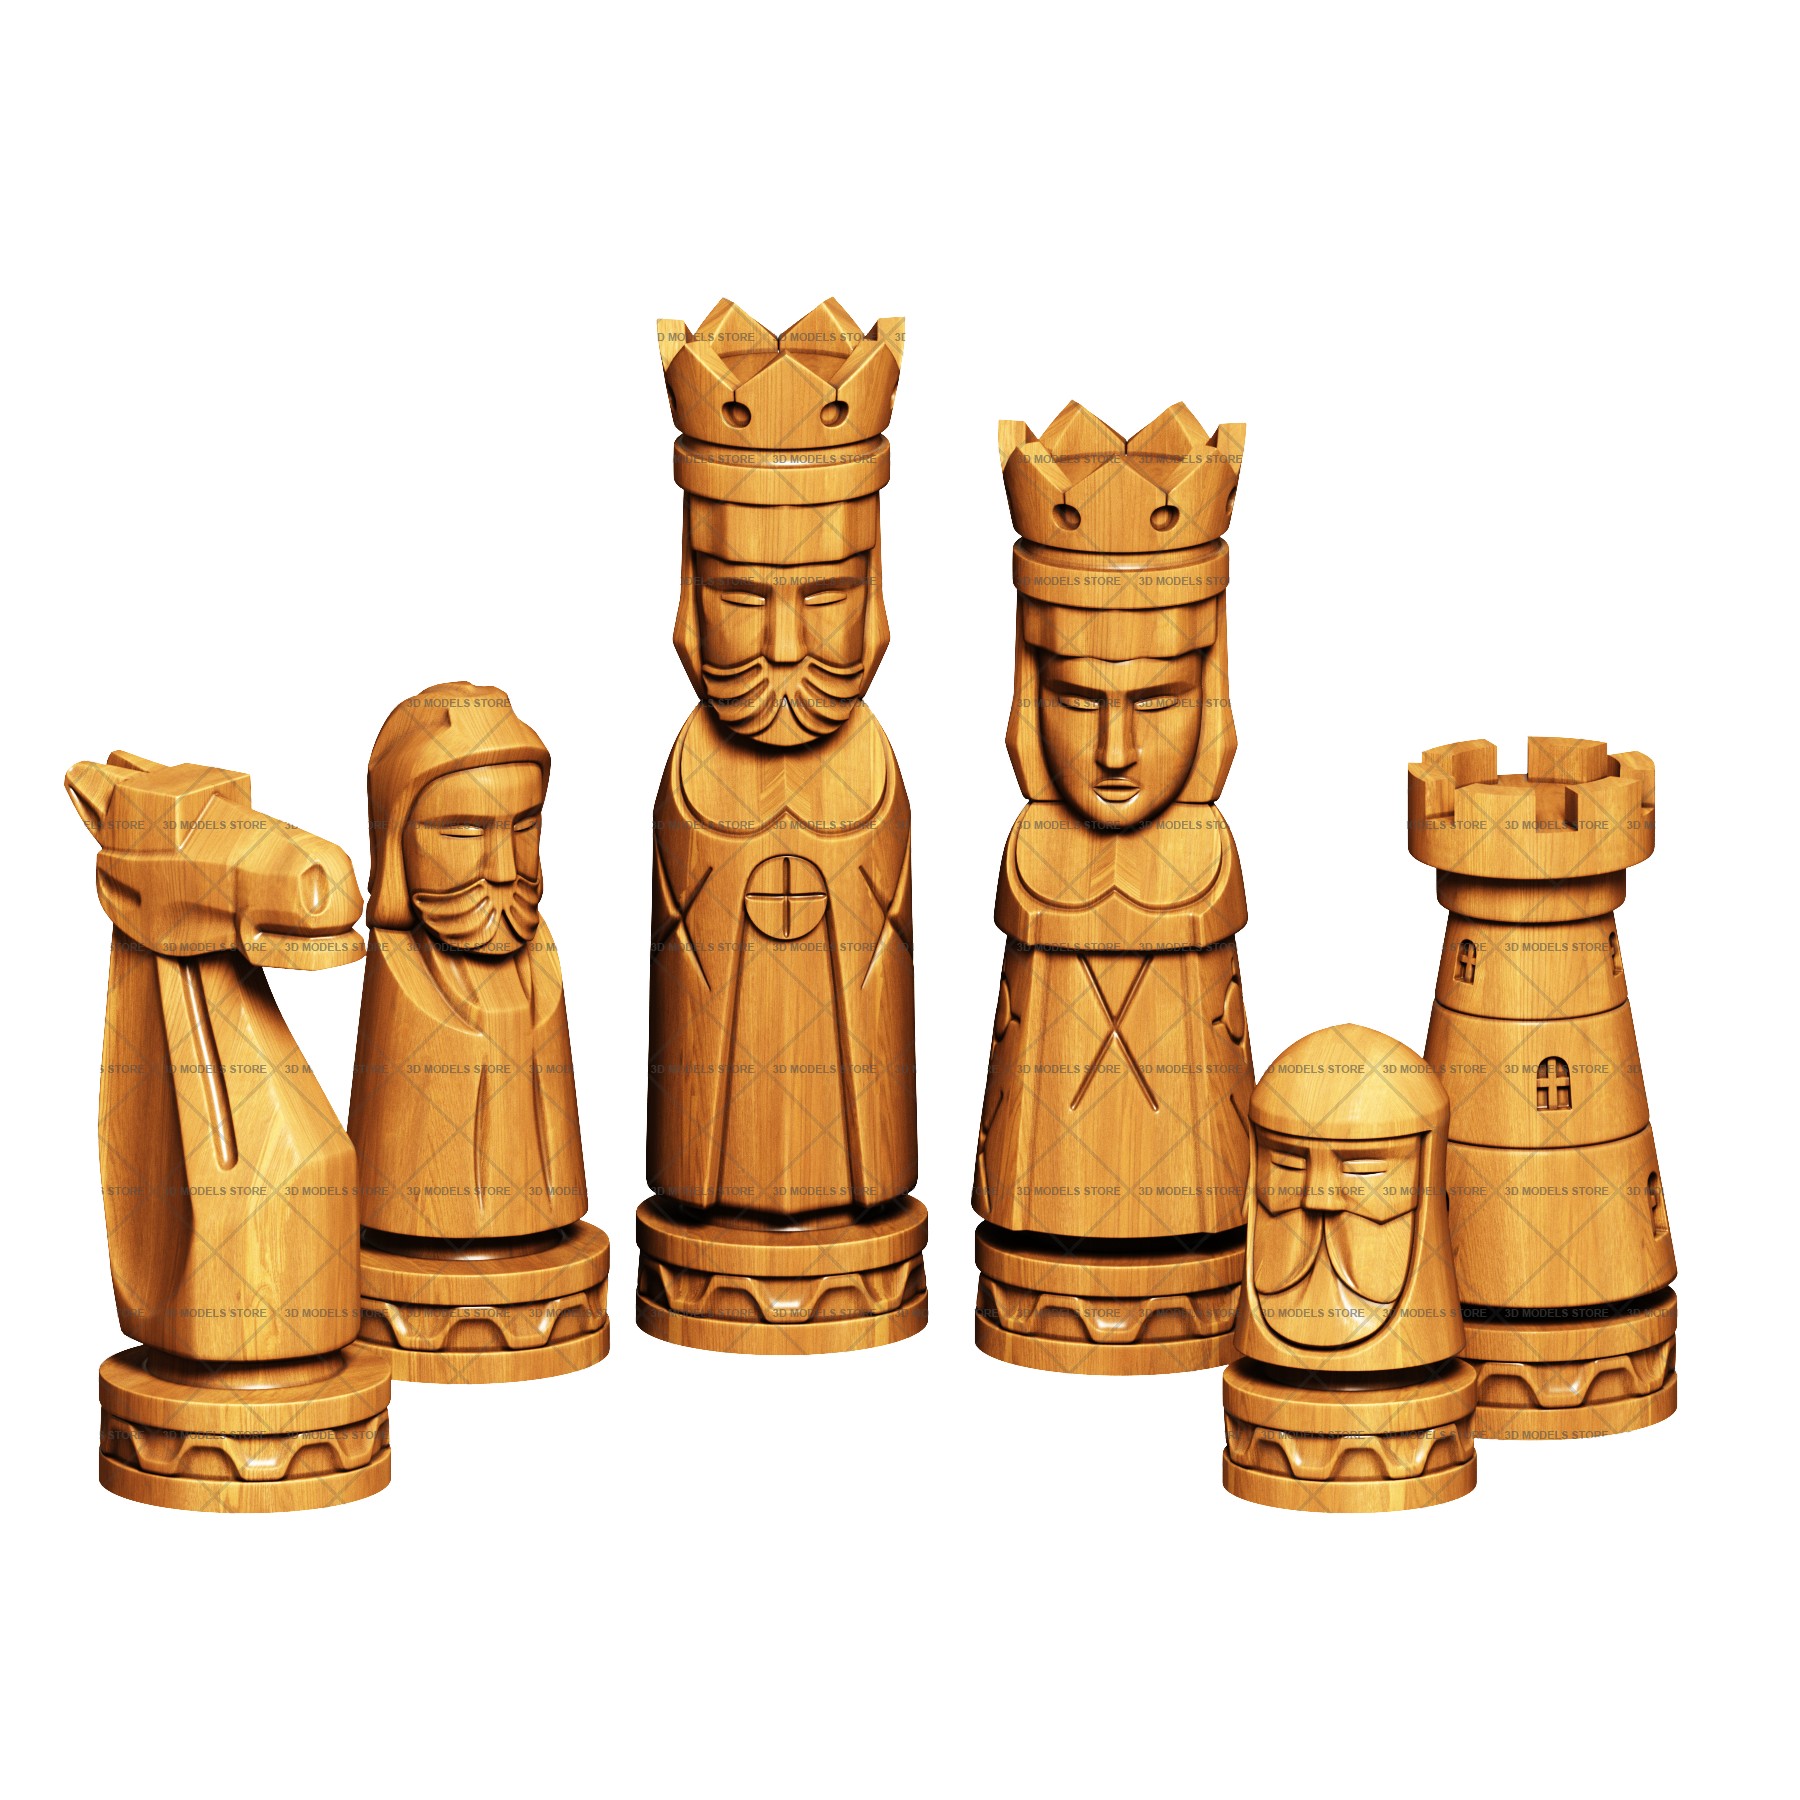 3D Printed Chess Set Pieces: A Complete How-to Guide For Custom Making Your  Own - J-CAD Inc. 1.888.202.2052